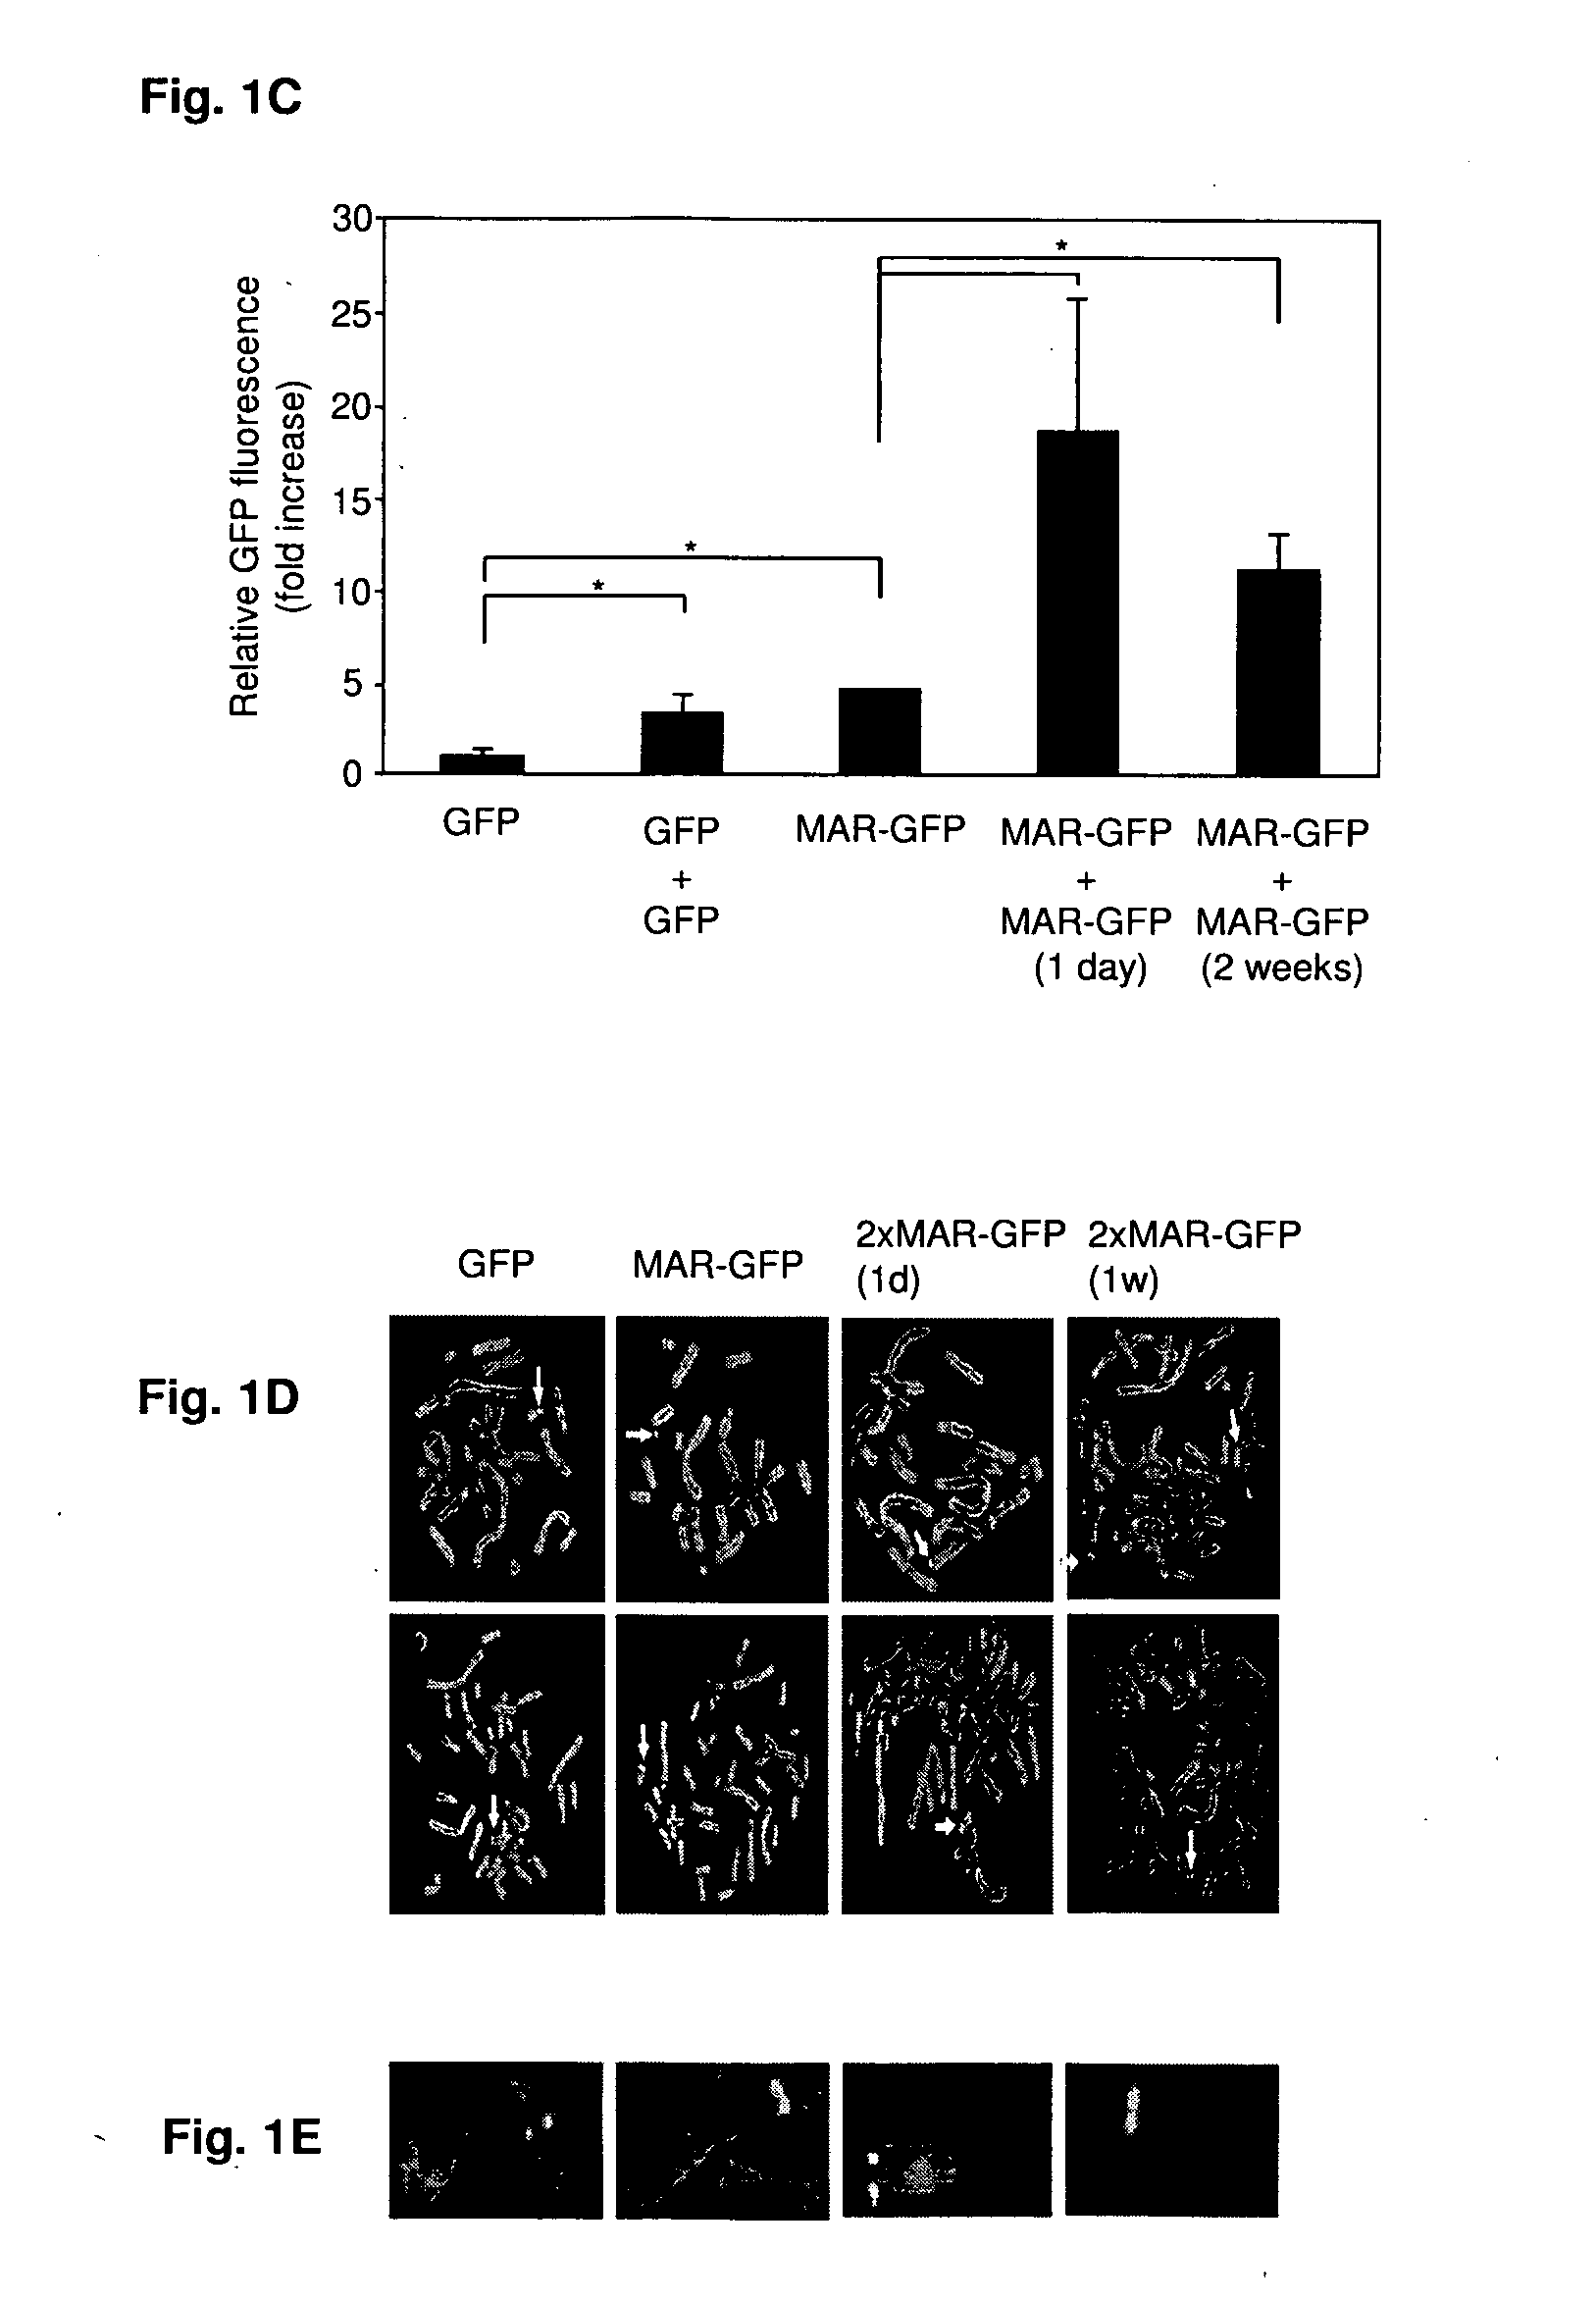 Products and methods for enhanced transgene expression and processing